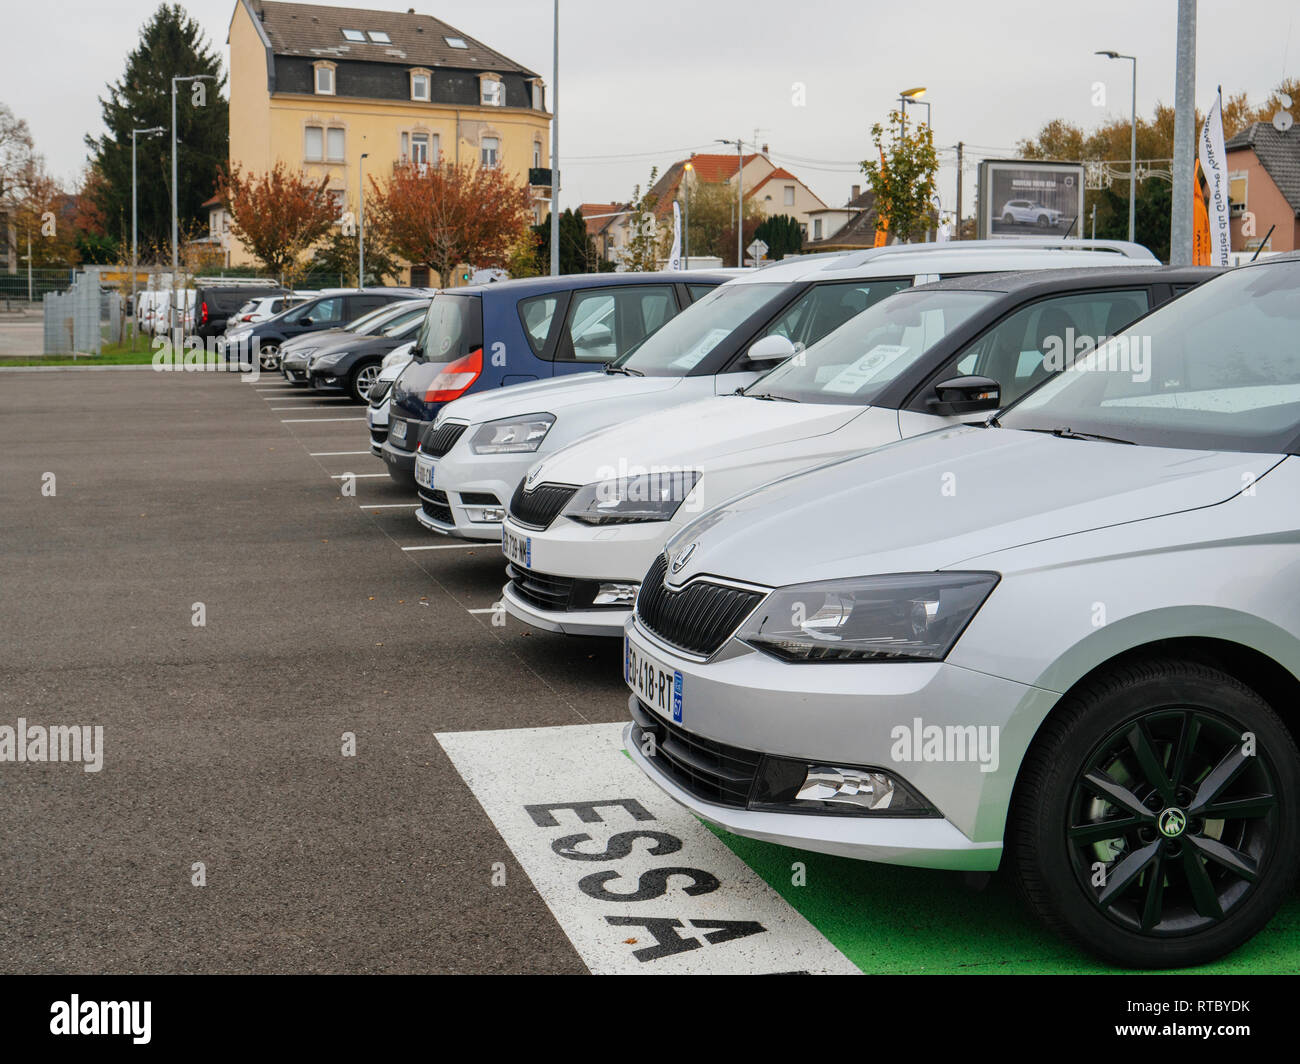 PARIS, FRANCE - NOV 7, 2017: Essai text translated as Test Drive cars with row of new Skoda Superb and Octavia cars made by Volkswagen at the car dealership garage Stock Photo